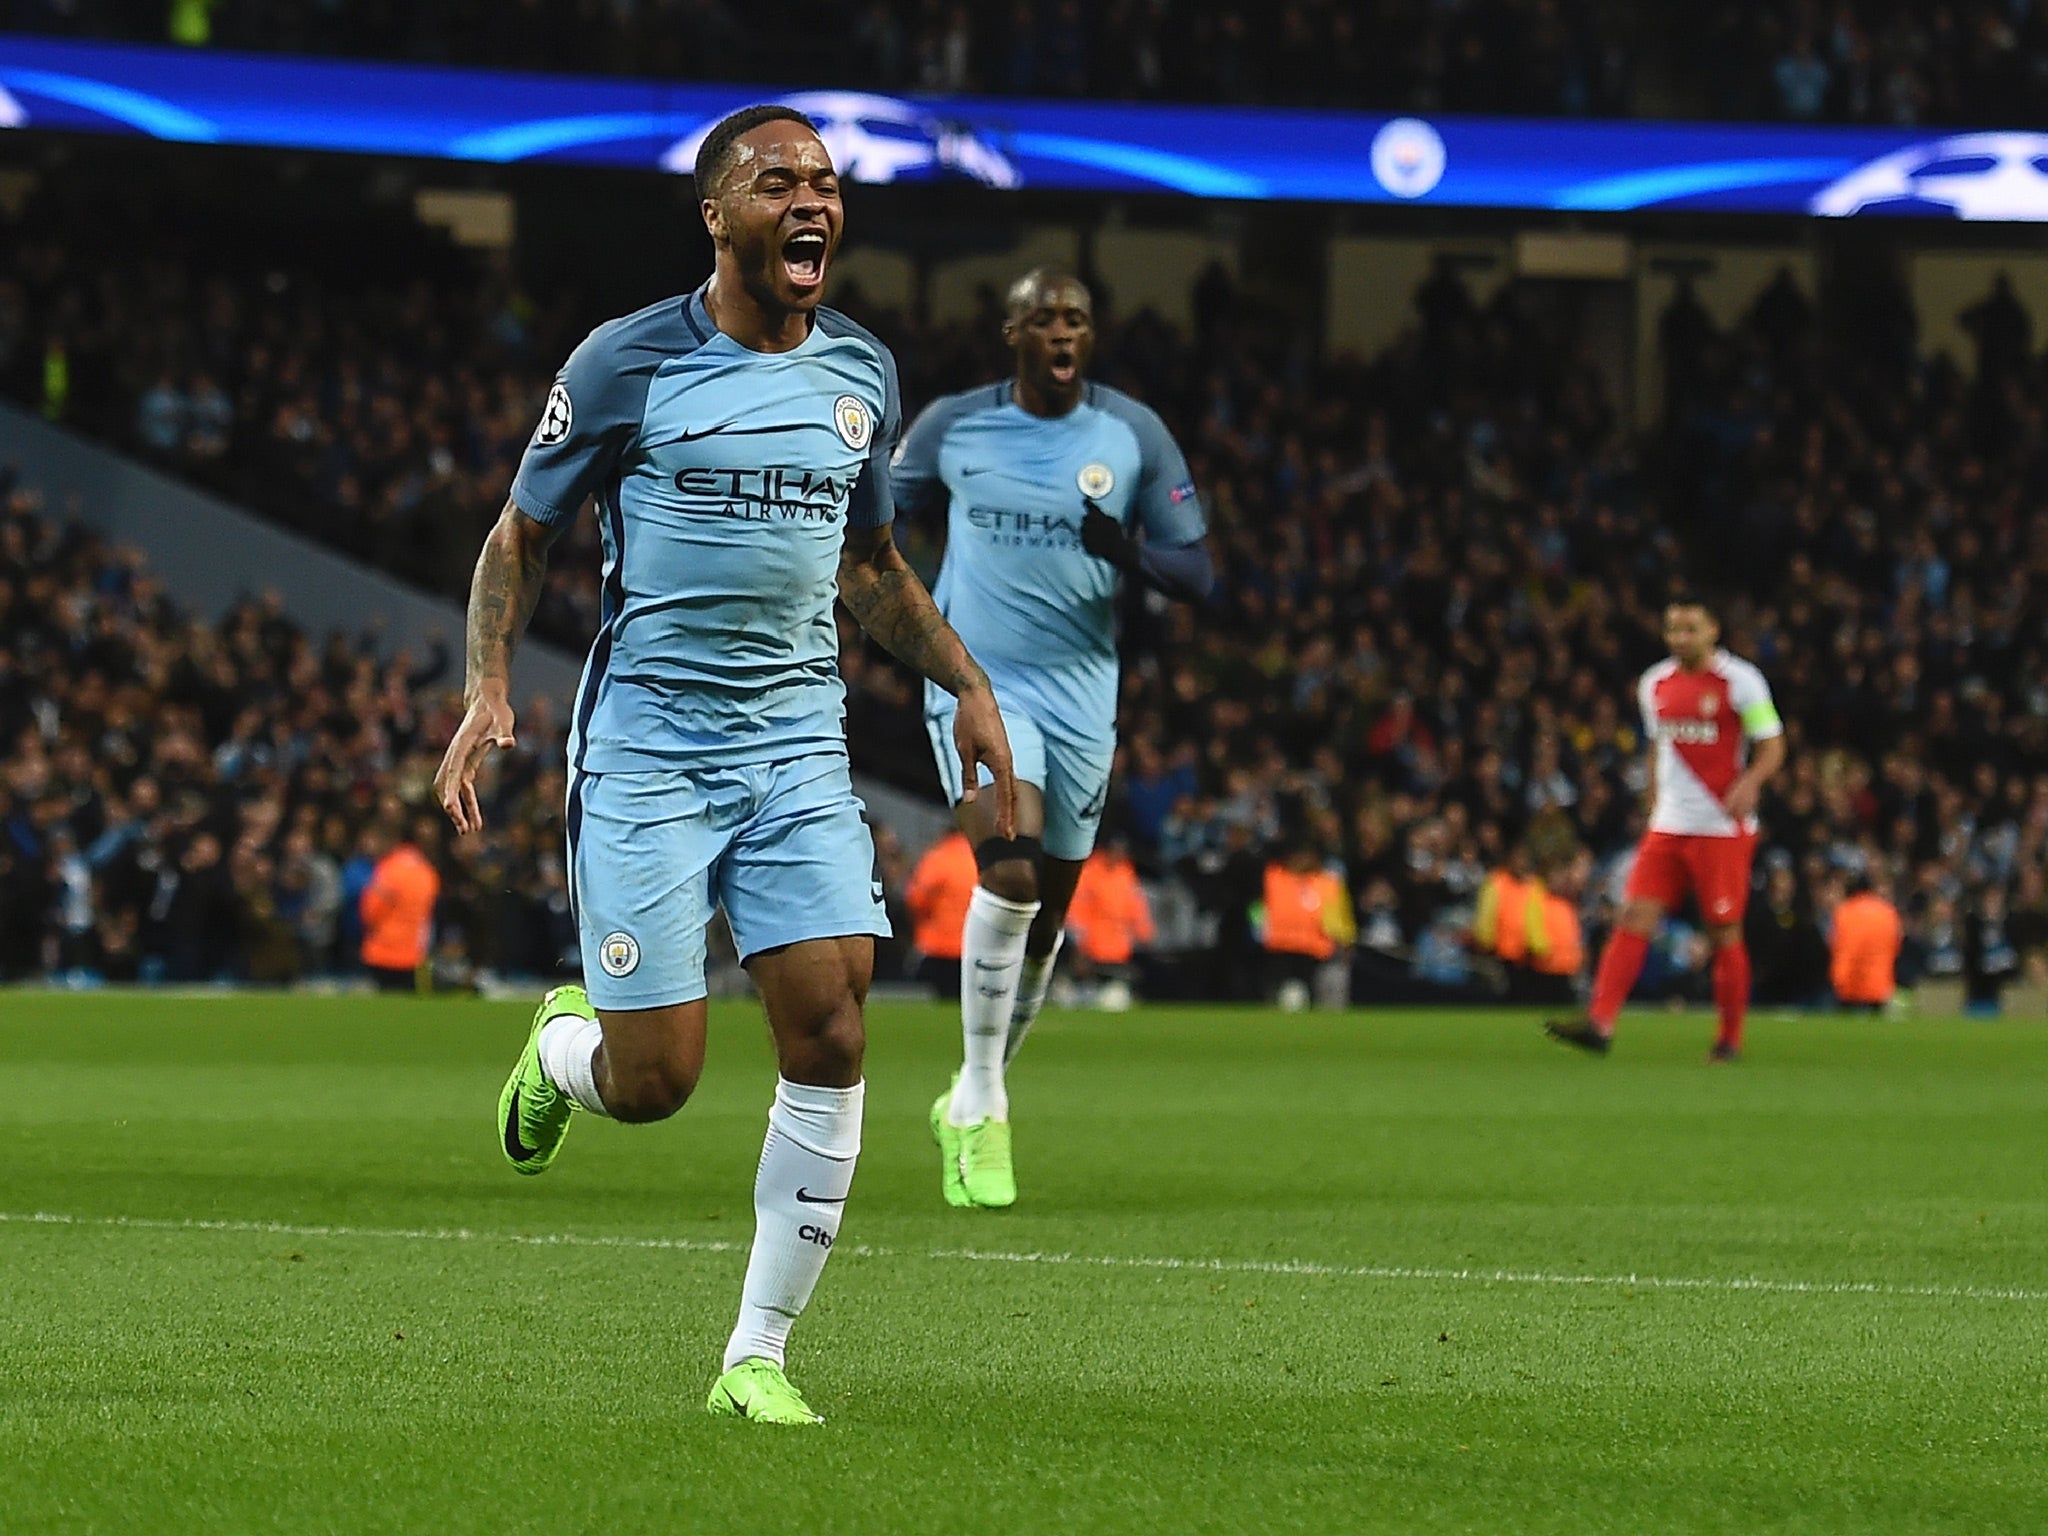 Raheem Sterling opened the scoring with a tidy finish after 26 minutes